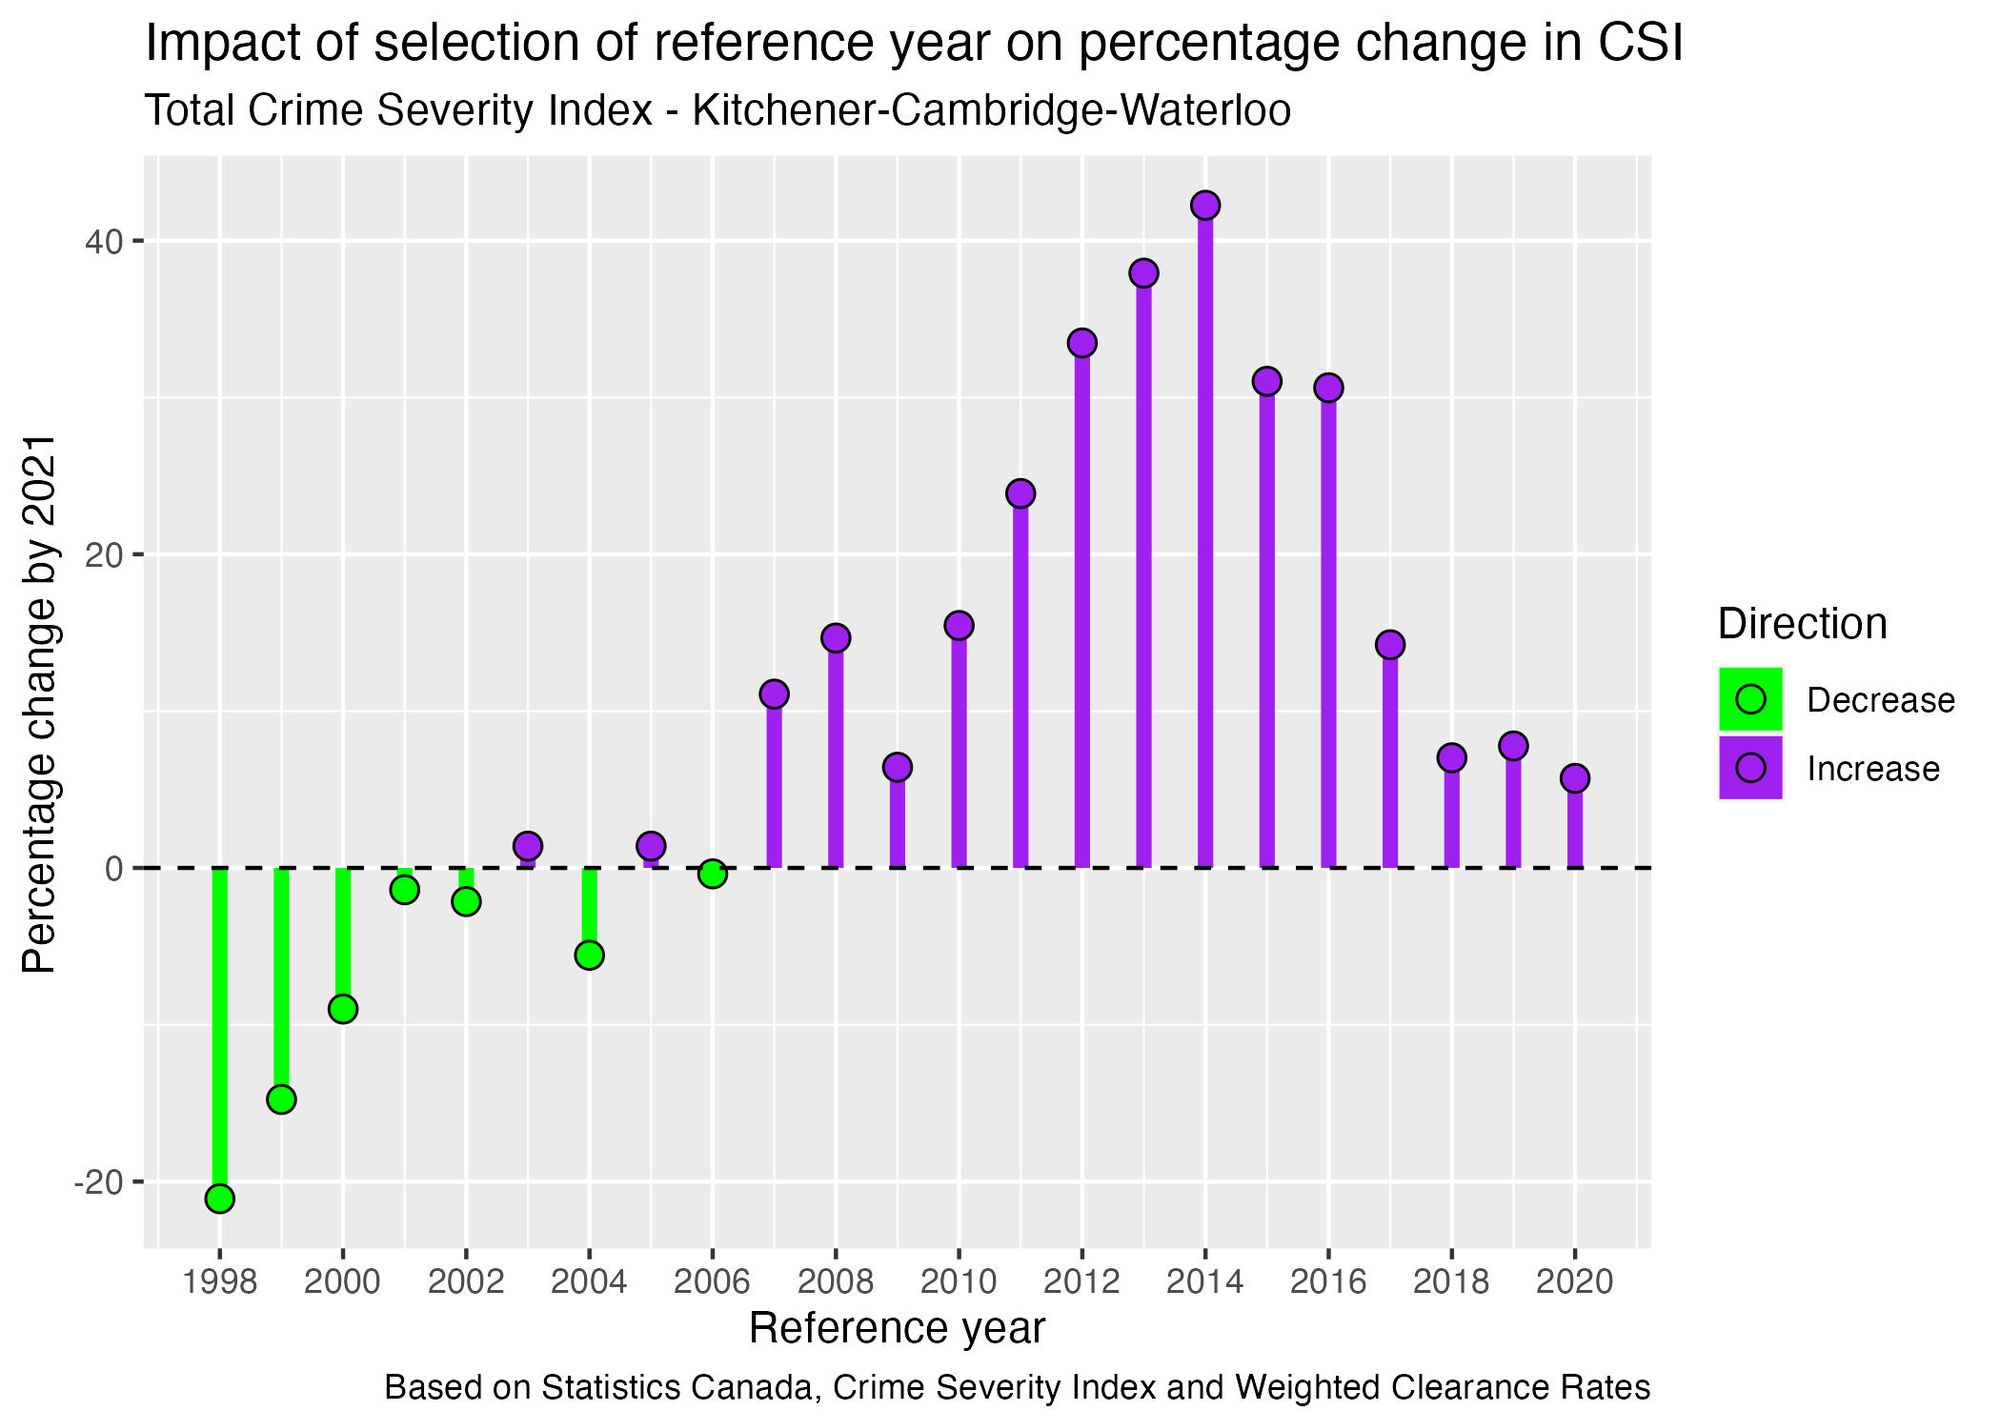 A graph of "Impact of selection of reference year on percentage change in CSI" for Kitchener-Cambridge-Waterloo. The size of the change between the reference year and 2021 is indicated by the length of a line, ranging from a 21% decrease relative to 1998 to a 42% increase relative to 2014. The changes are decreasing prior to 2001, tend to be near zero between 2001 and 2006, and are increases from 2007 onward.